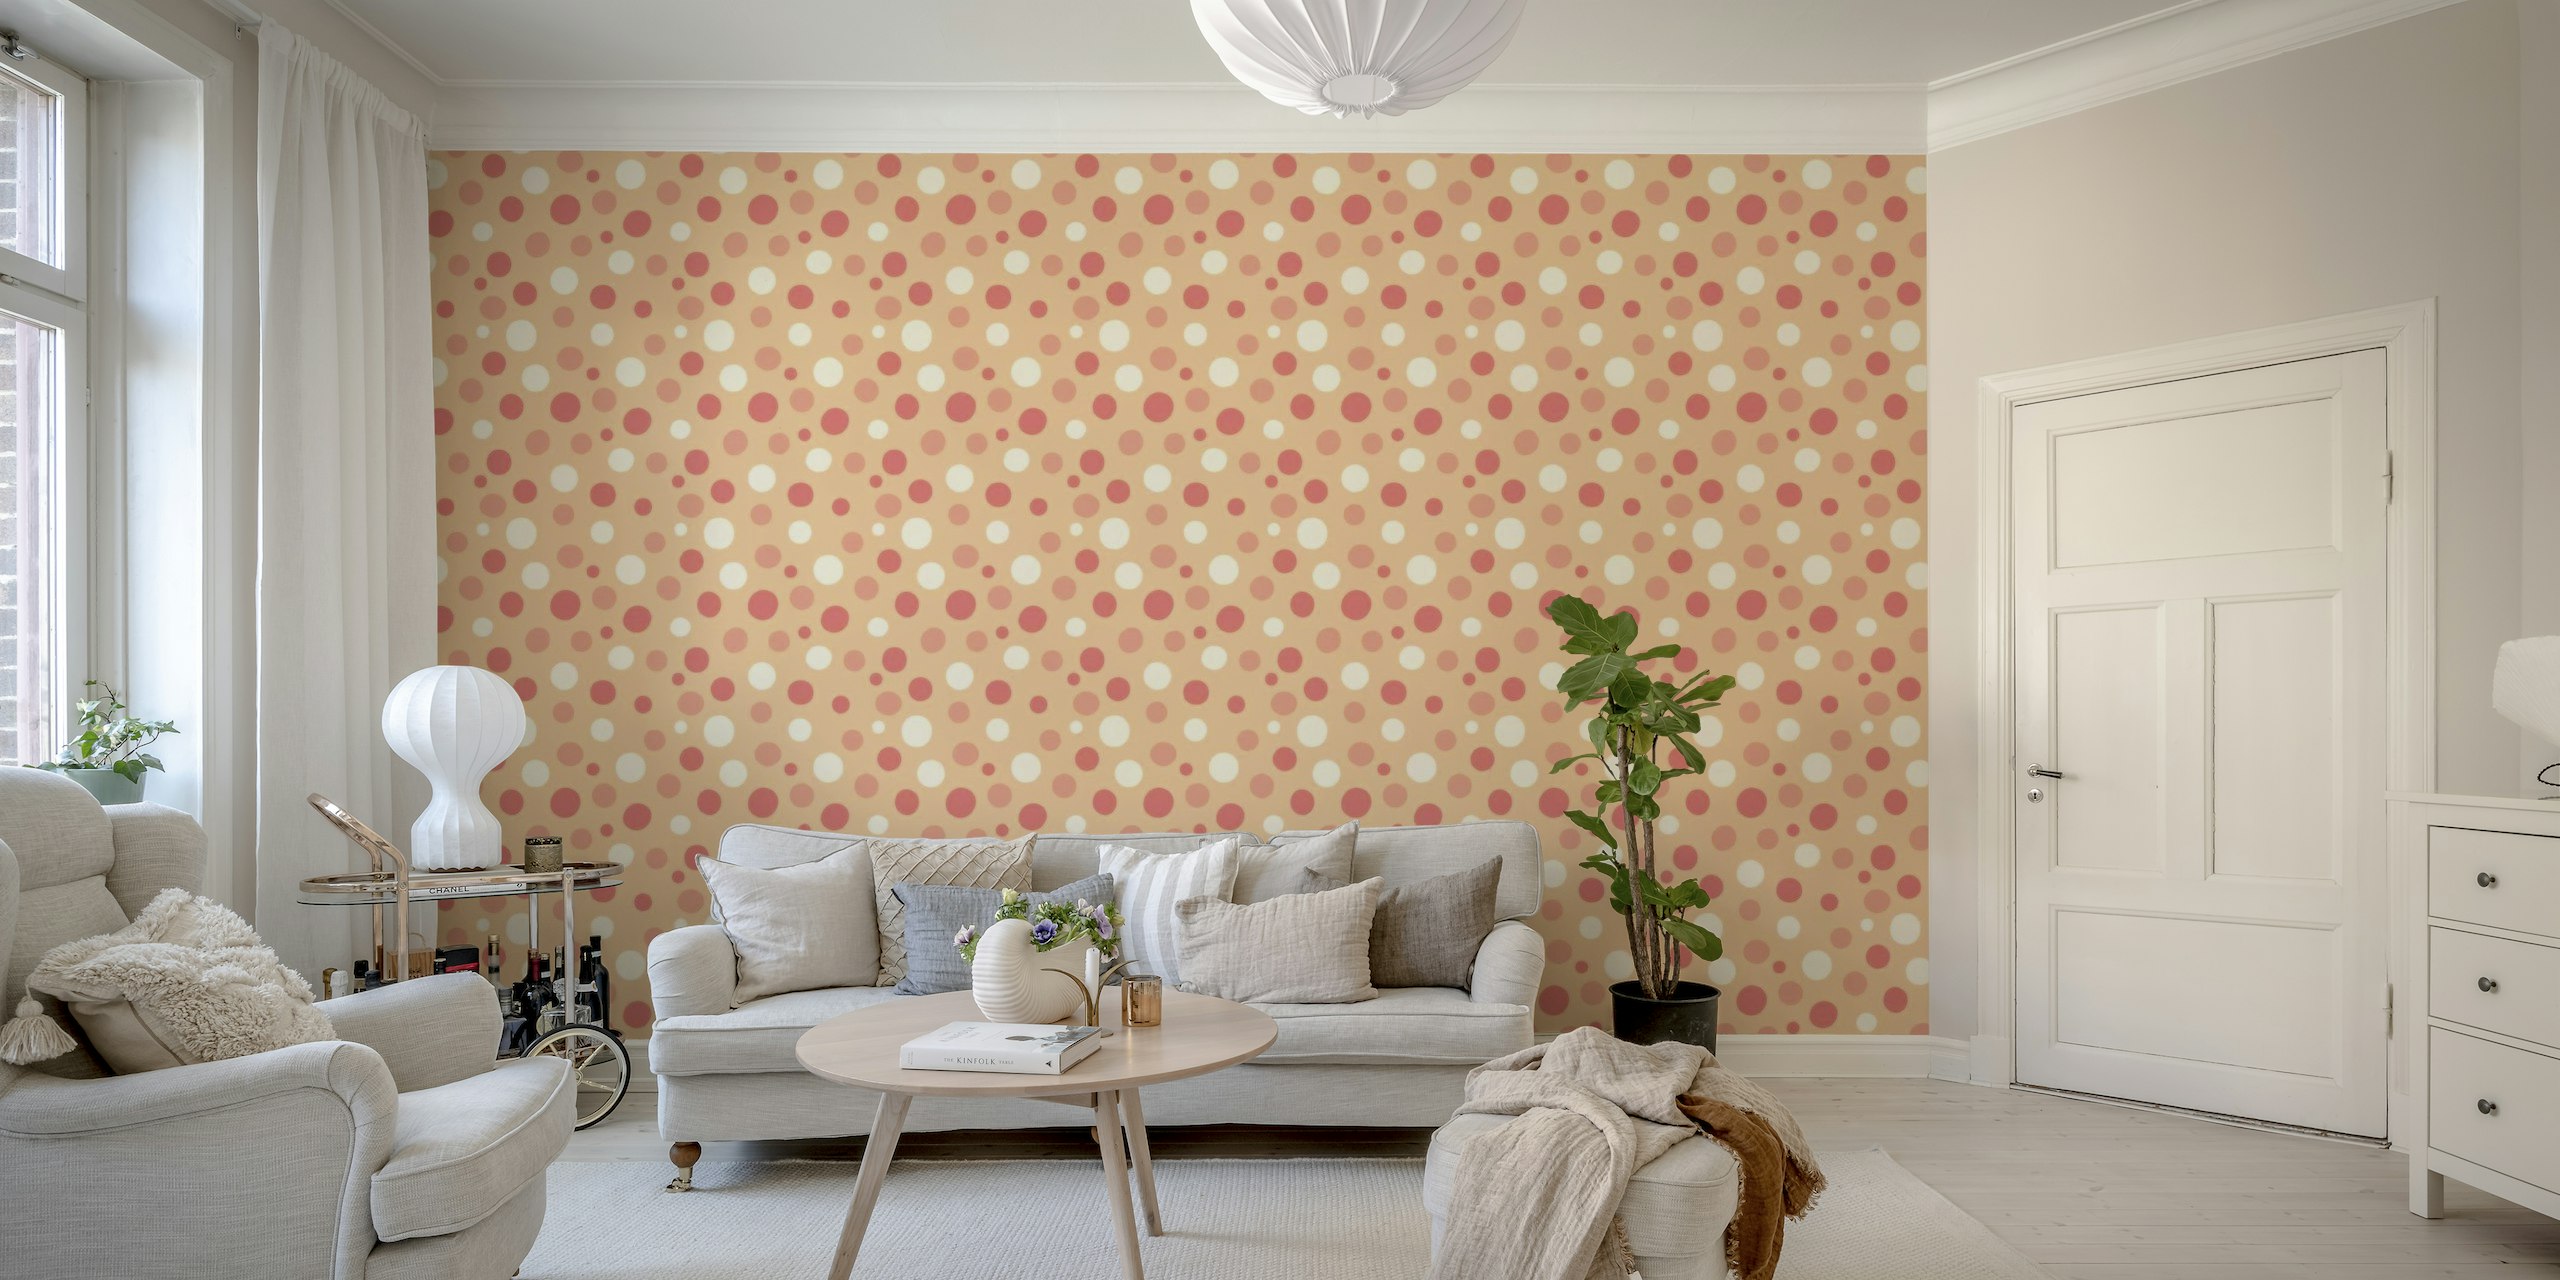 SCATTERED DOTS Simple Polka Dots - Peach Fuzz behang